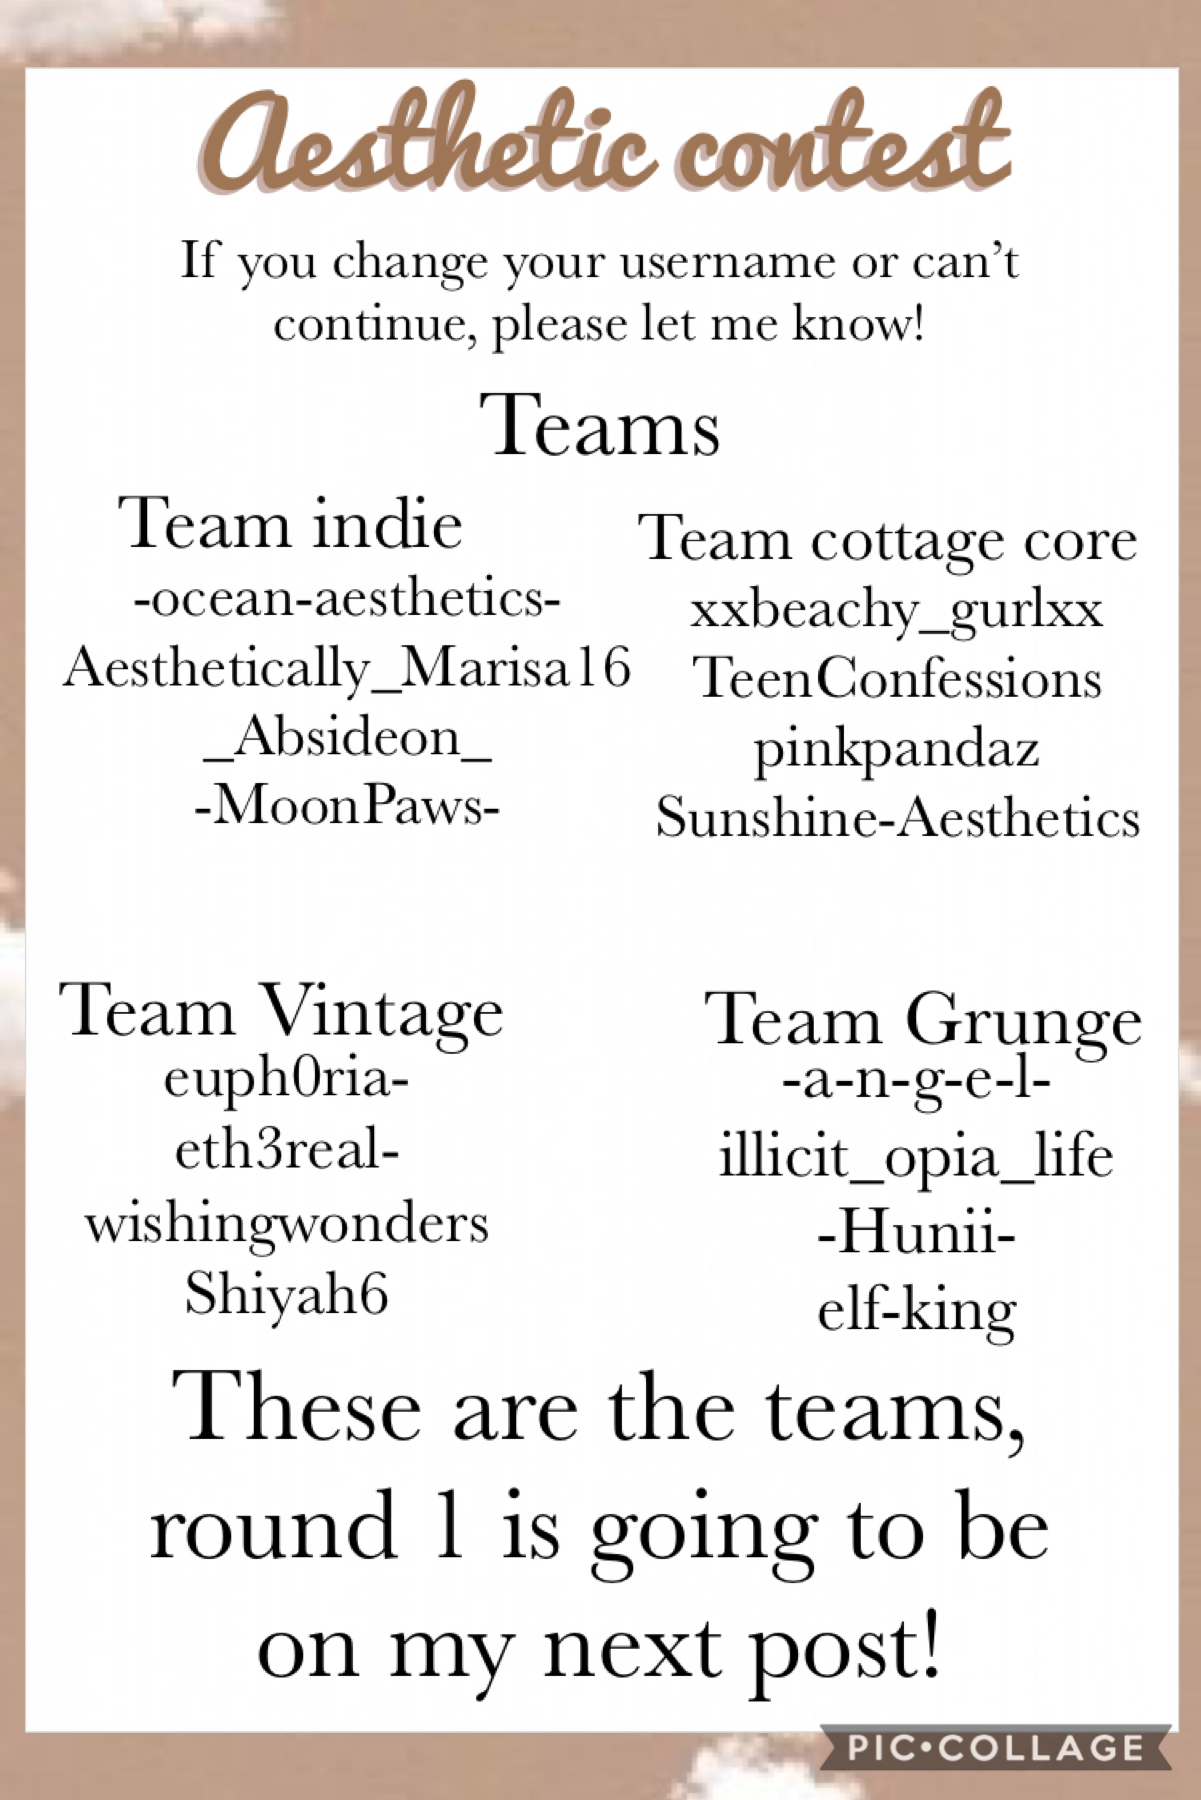 ☁️Teams☁️
Round 1 will be out on my next post!